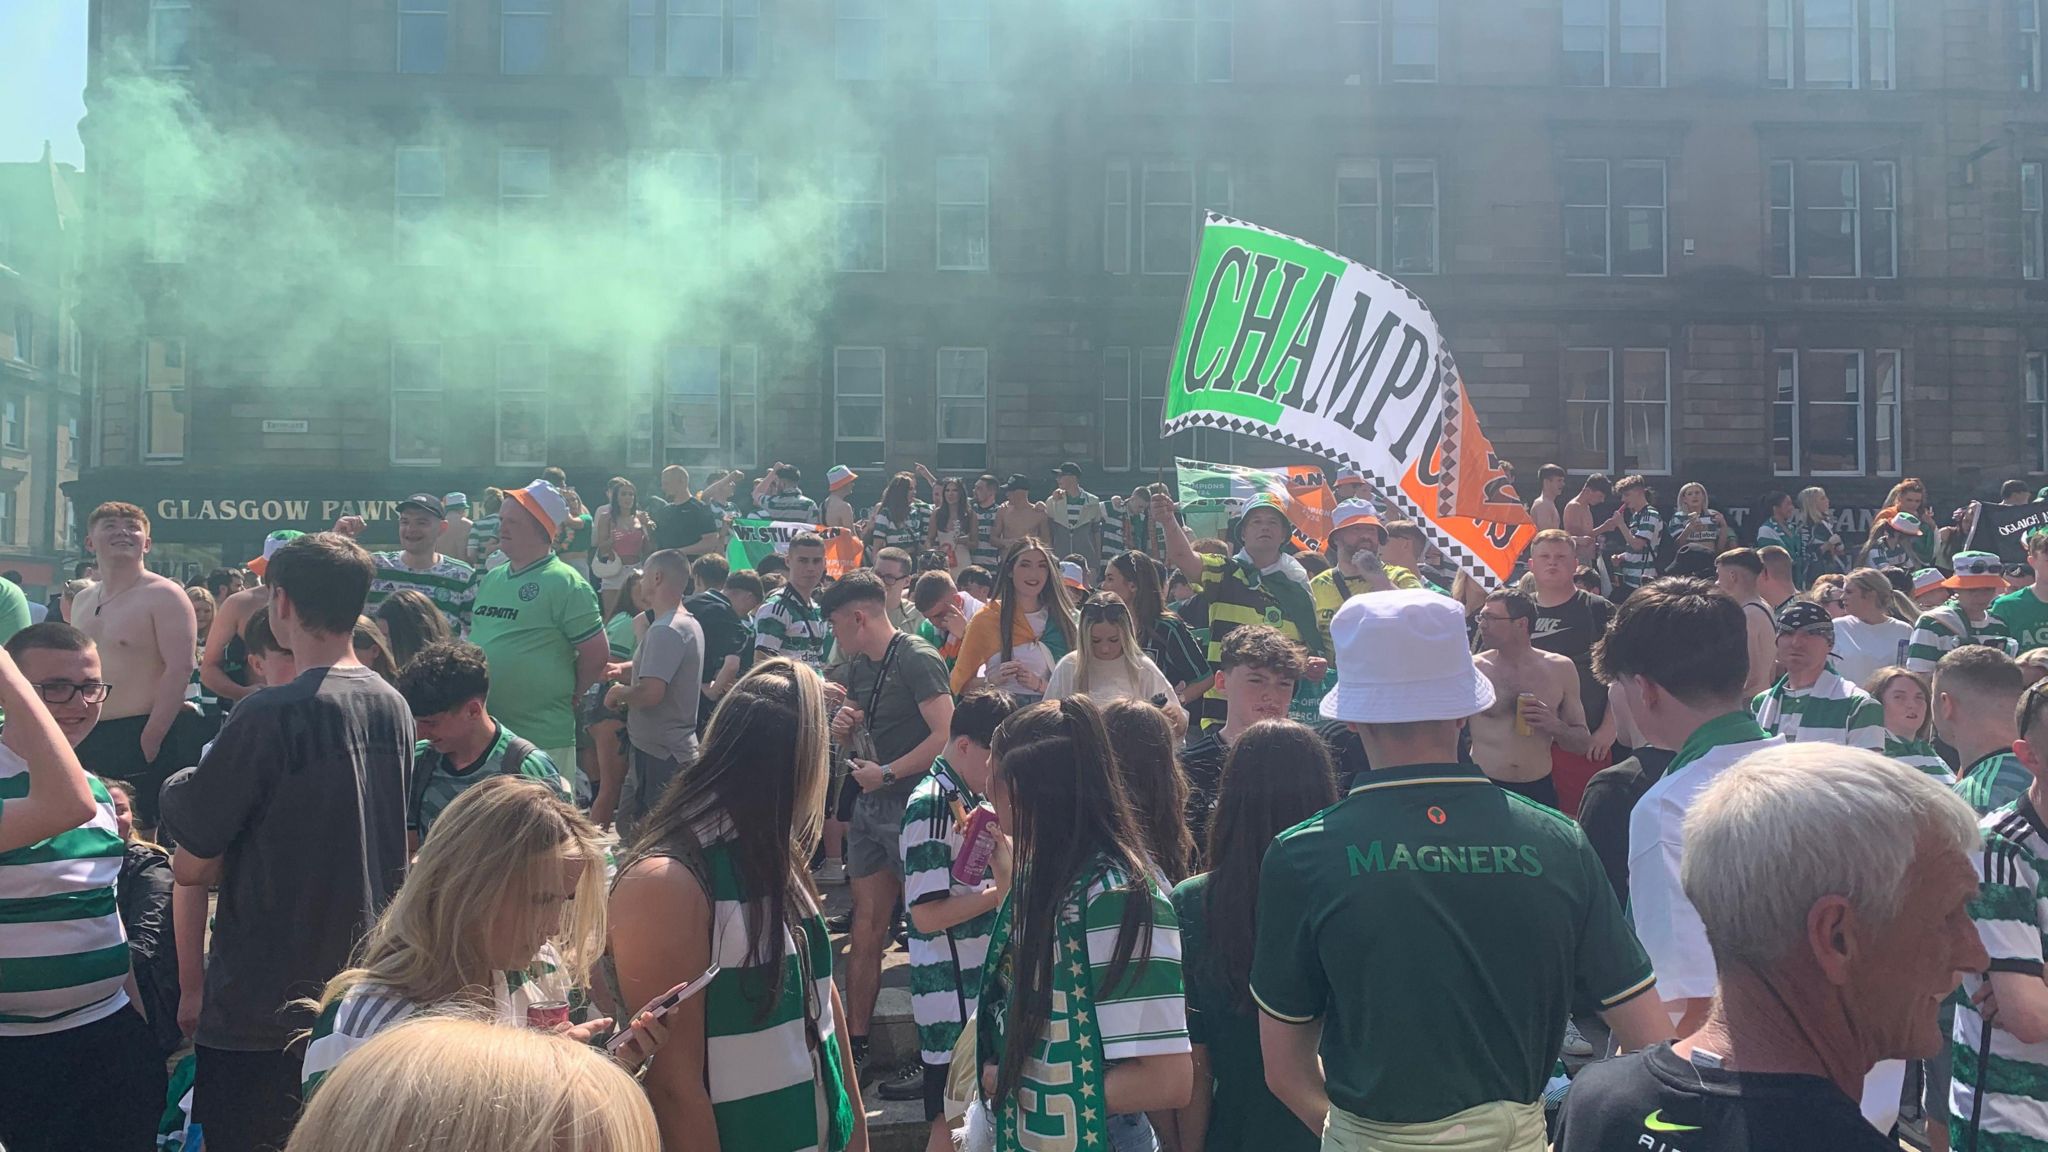 Celtic fans waving flags and banners in Glasgow